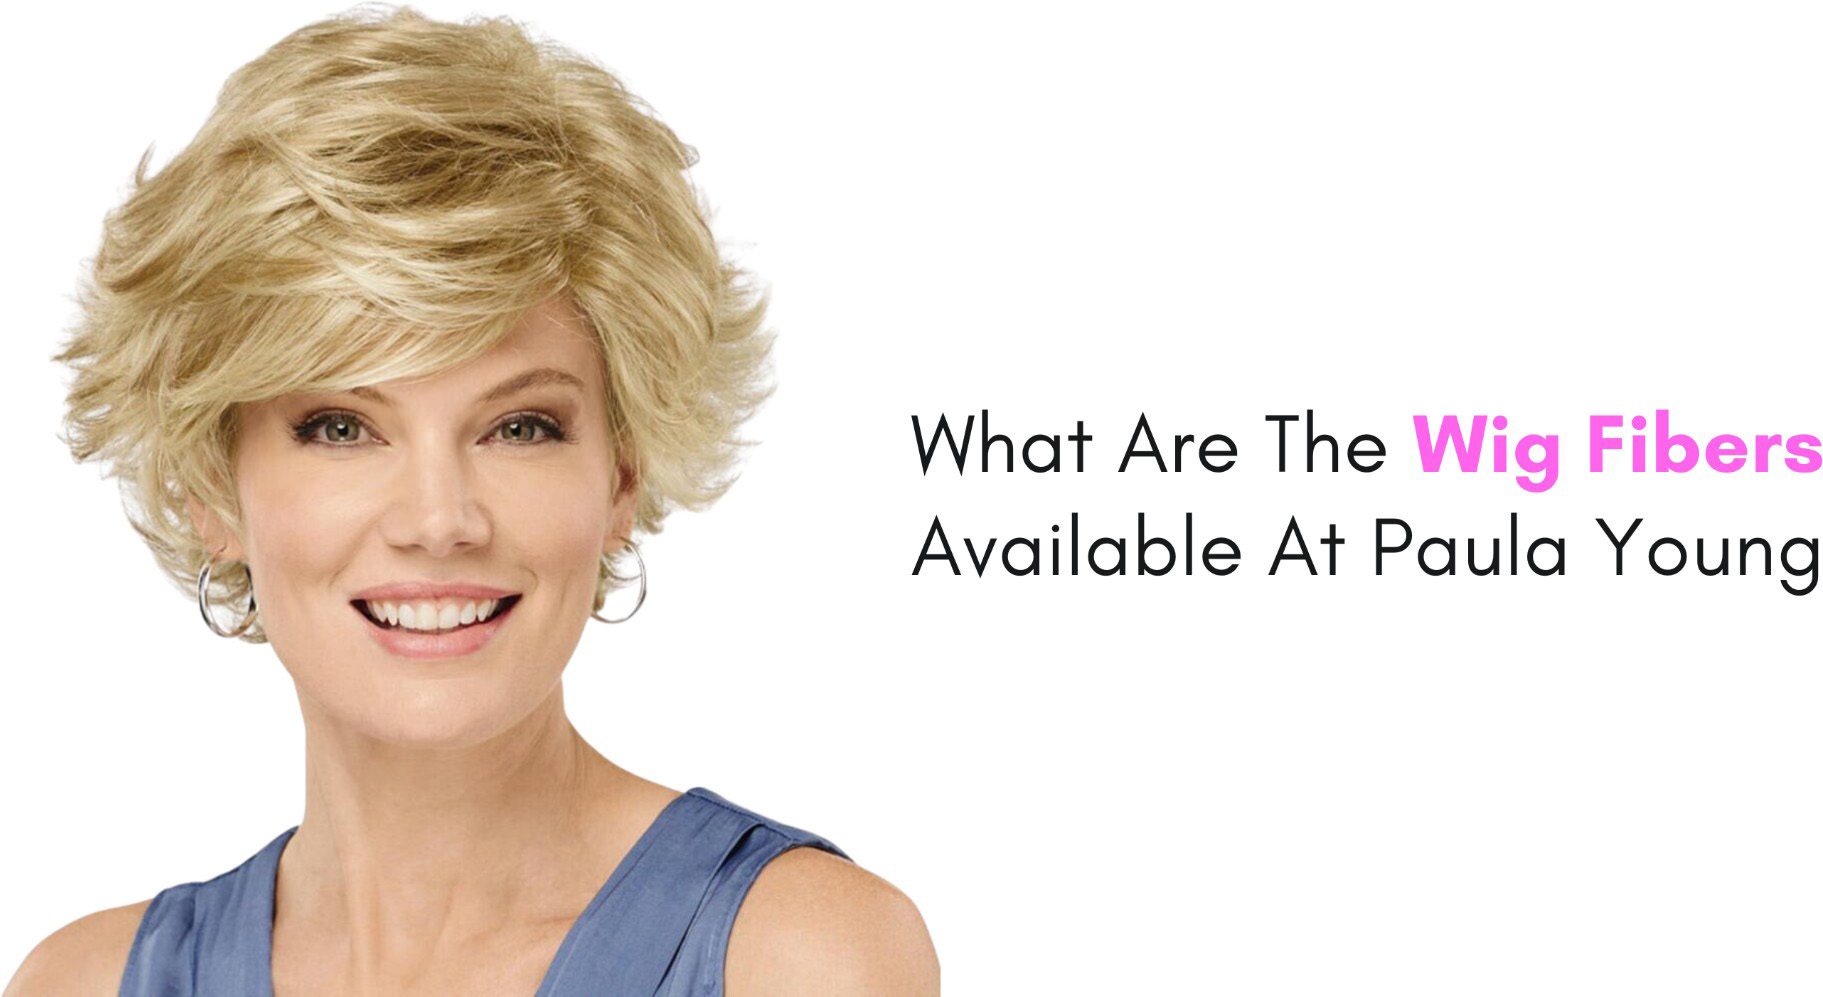 what are the wig fibers available at paula young